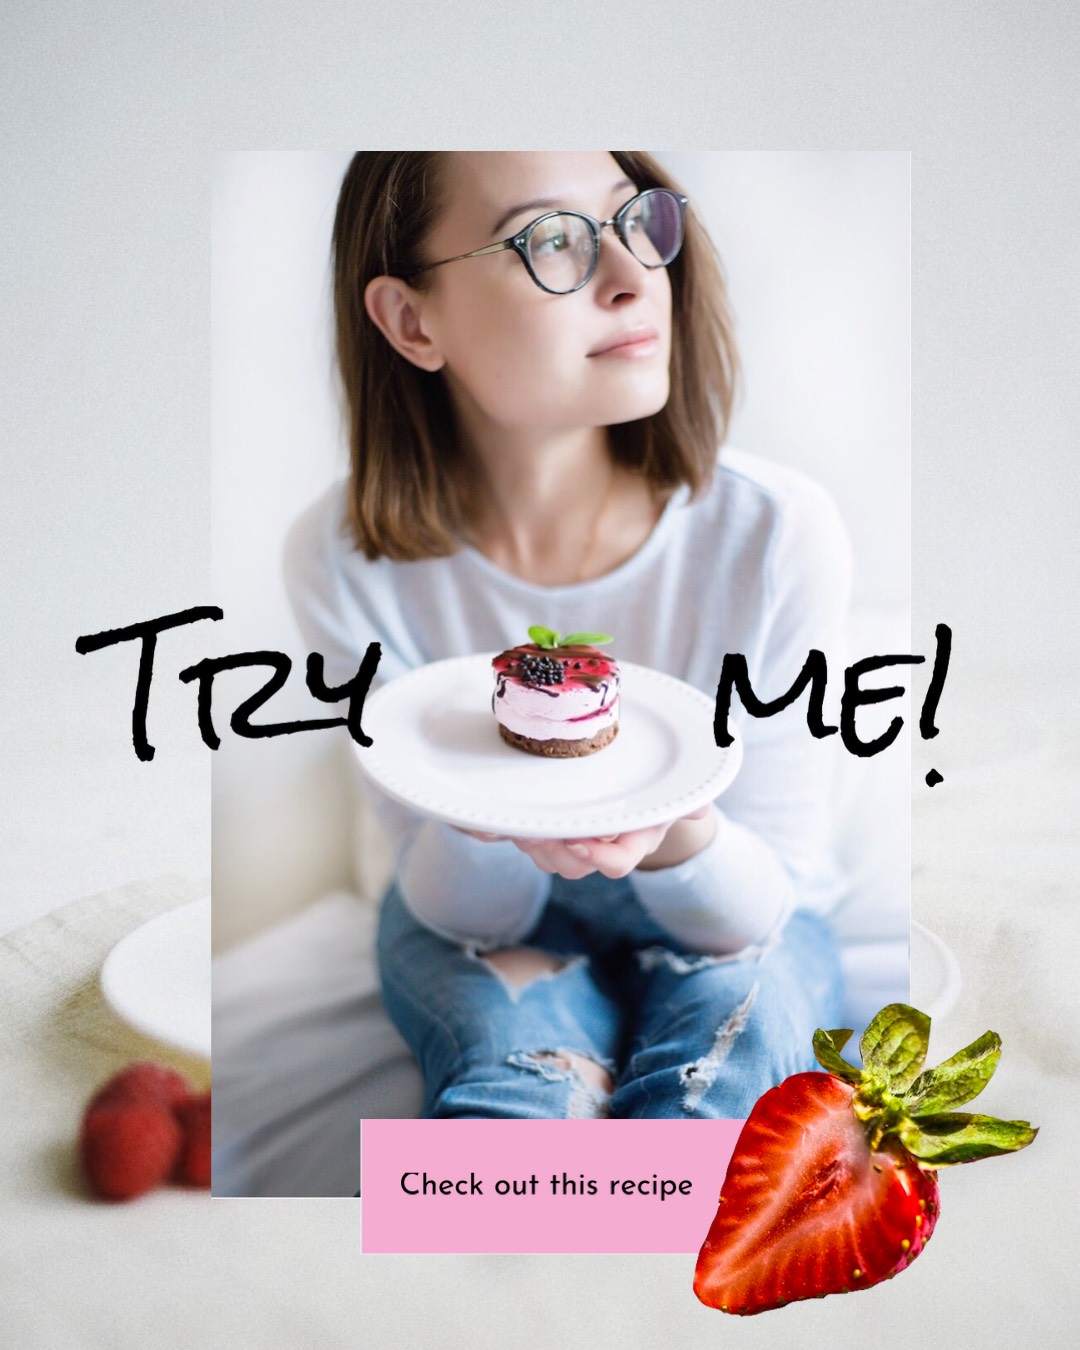 A Woman Holding A Plate With A Strawberry On It Foodie Template